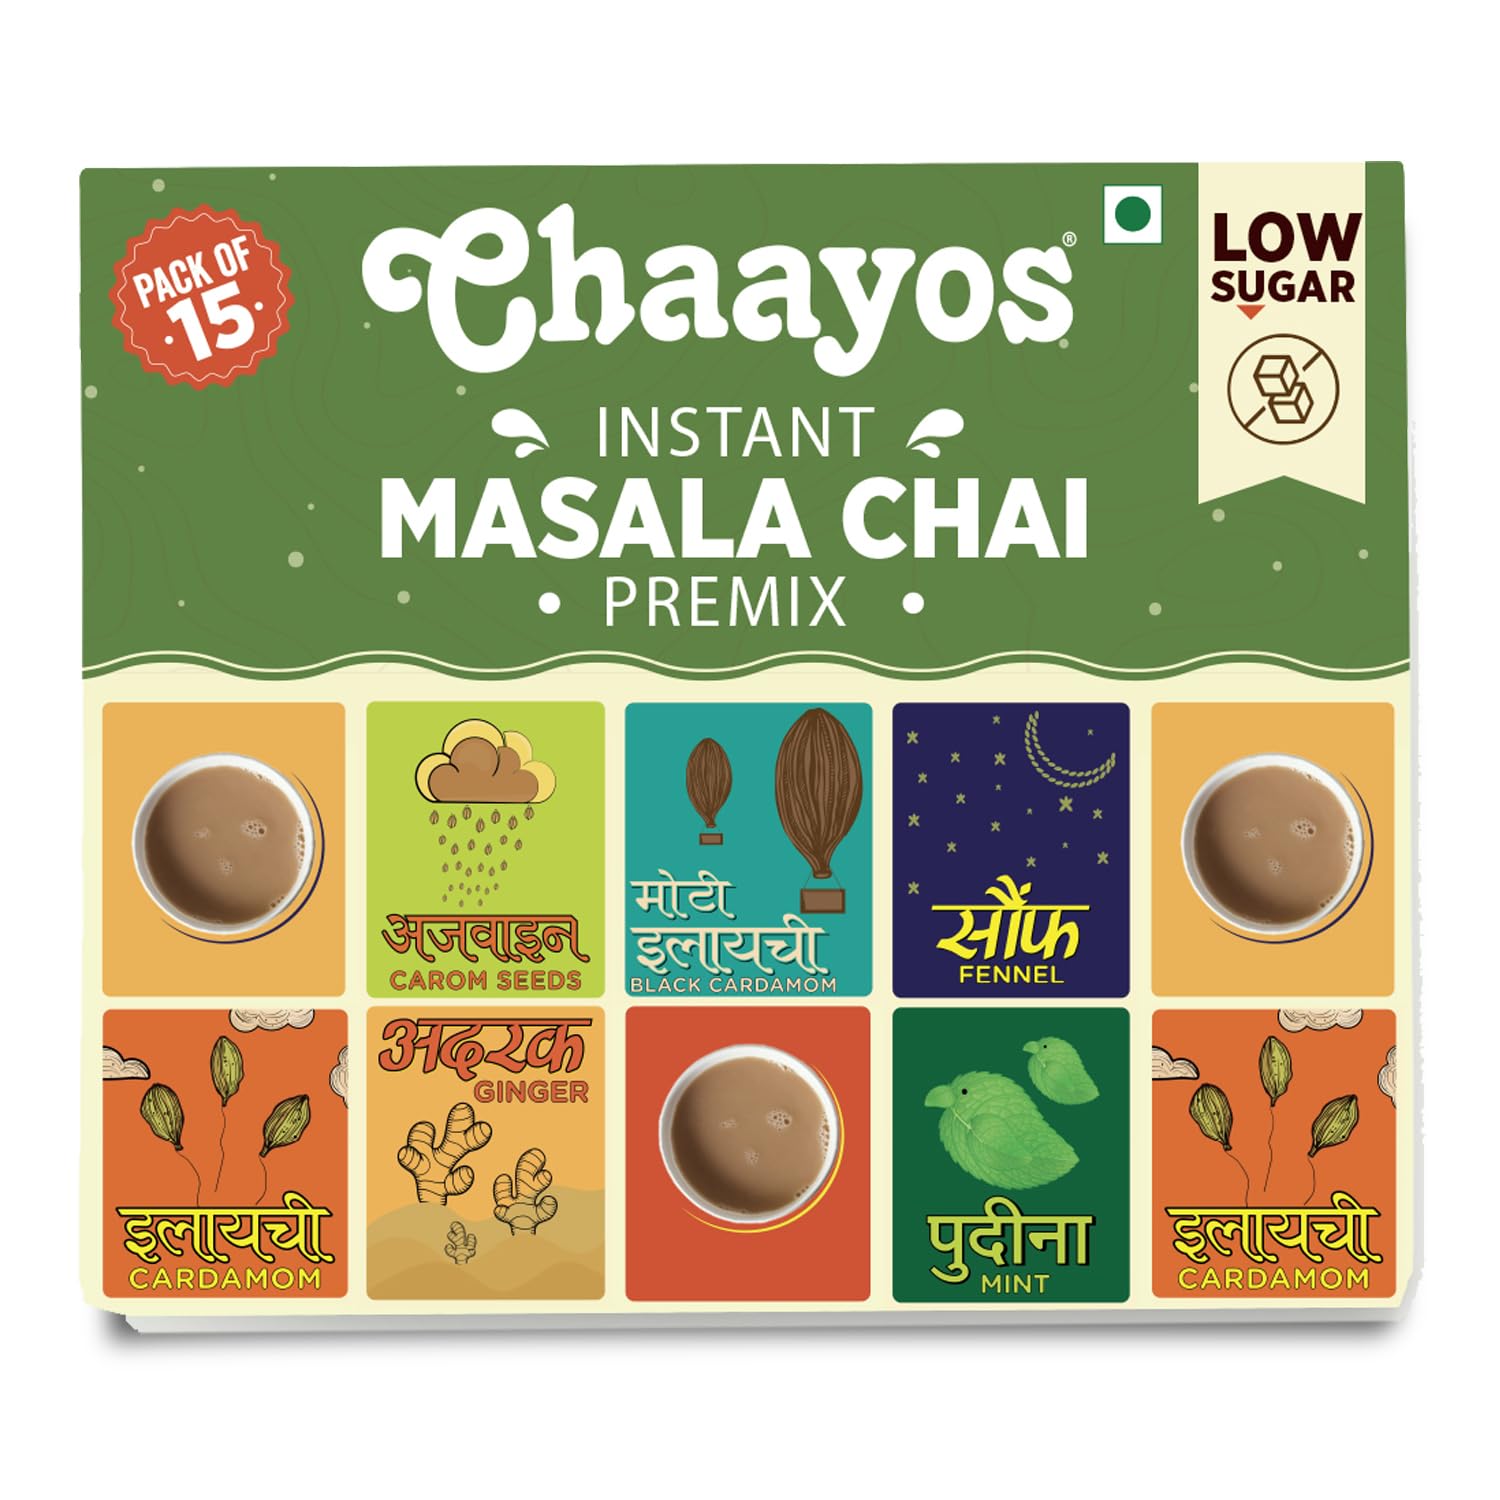 Chaayos Gift Box Price Starting From Rs 100/Pc | Find Verified Sellers at  Justdial